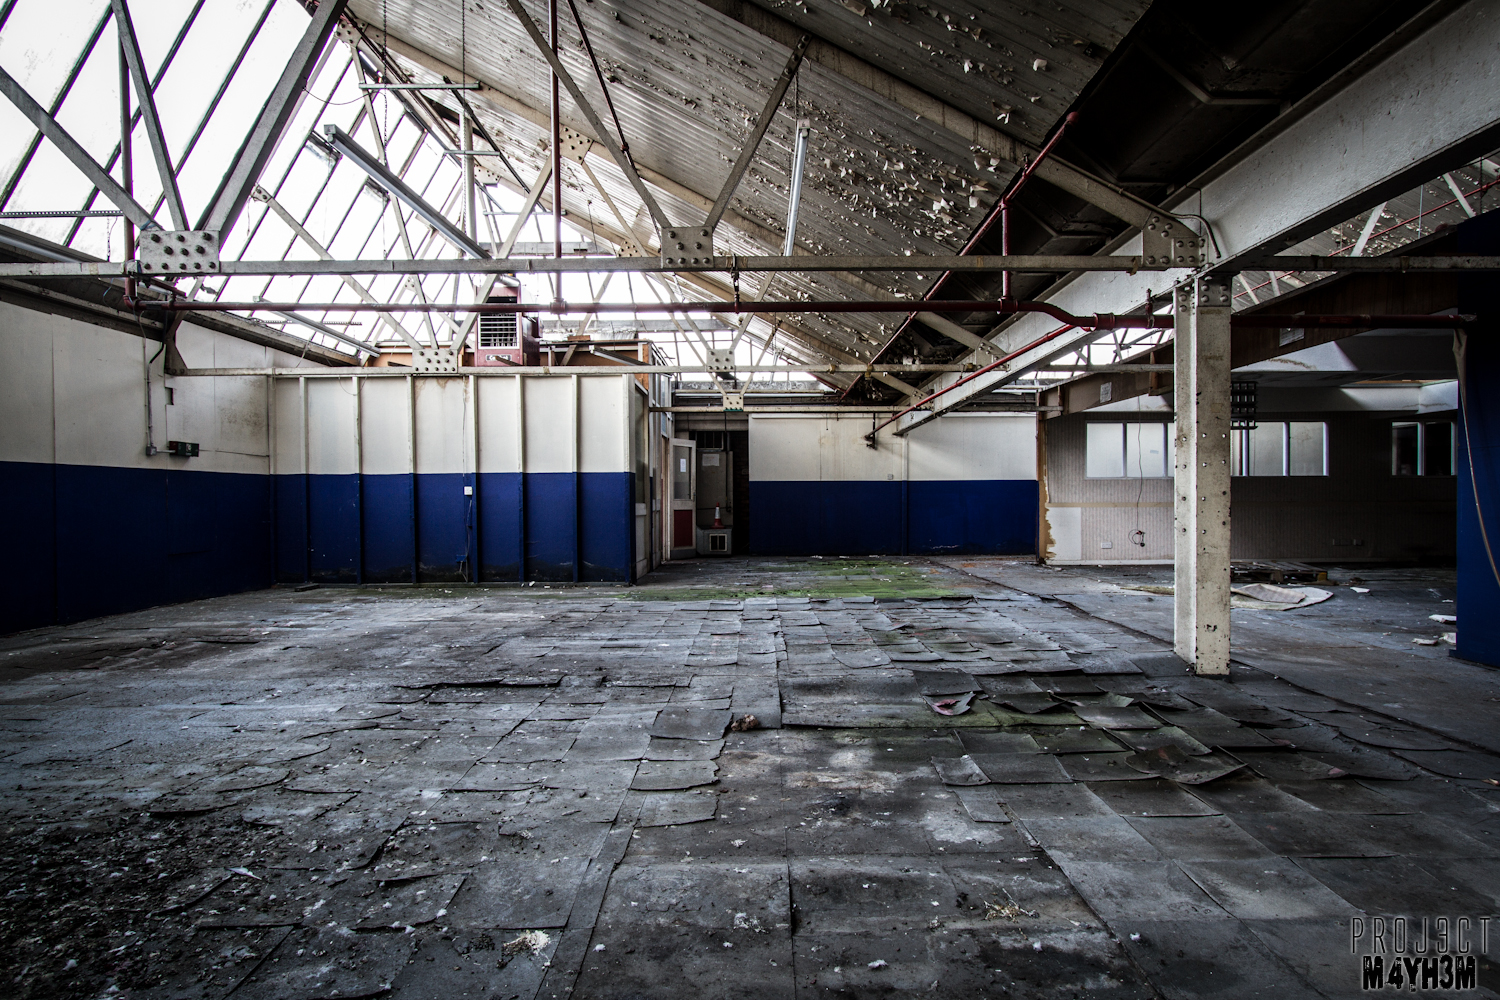 Urbex Abandoned Wallpaper Warehouse and Store Somewhere United